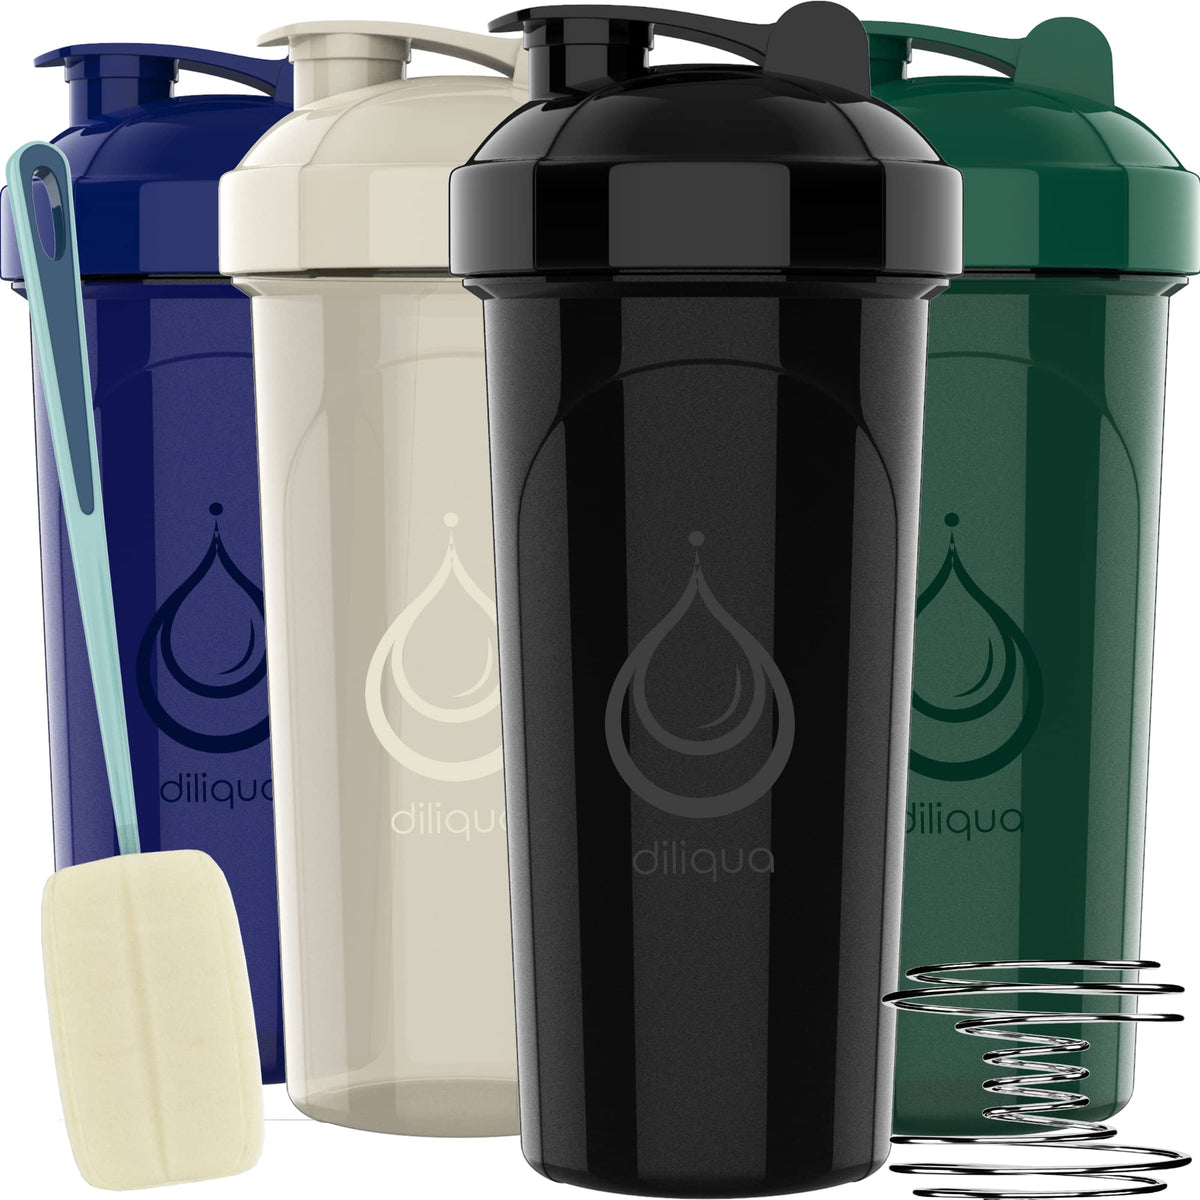 JEELA SPORTS 5 PACK Protein Shaker Bottles for Protein Mixes -20 OZ-  Dishwasher Safe Shaker Cups for Protein Shakes - Shaker Cup for Blender  Protein Shaker Bottle for Shakes Protein Shake Blender